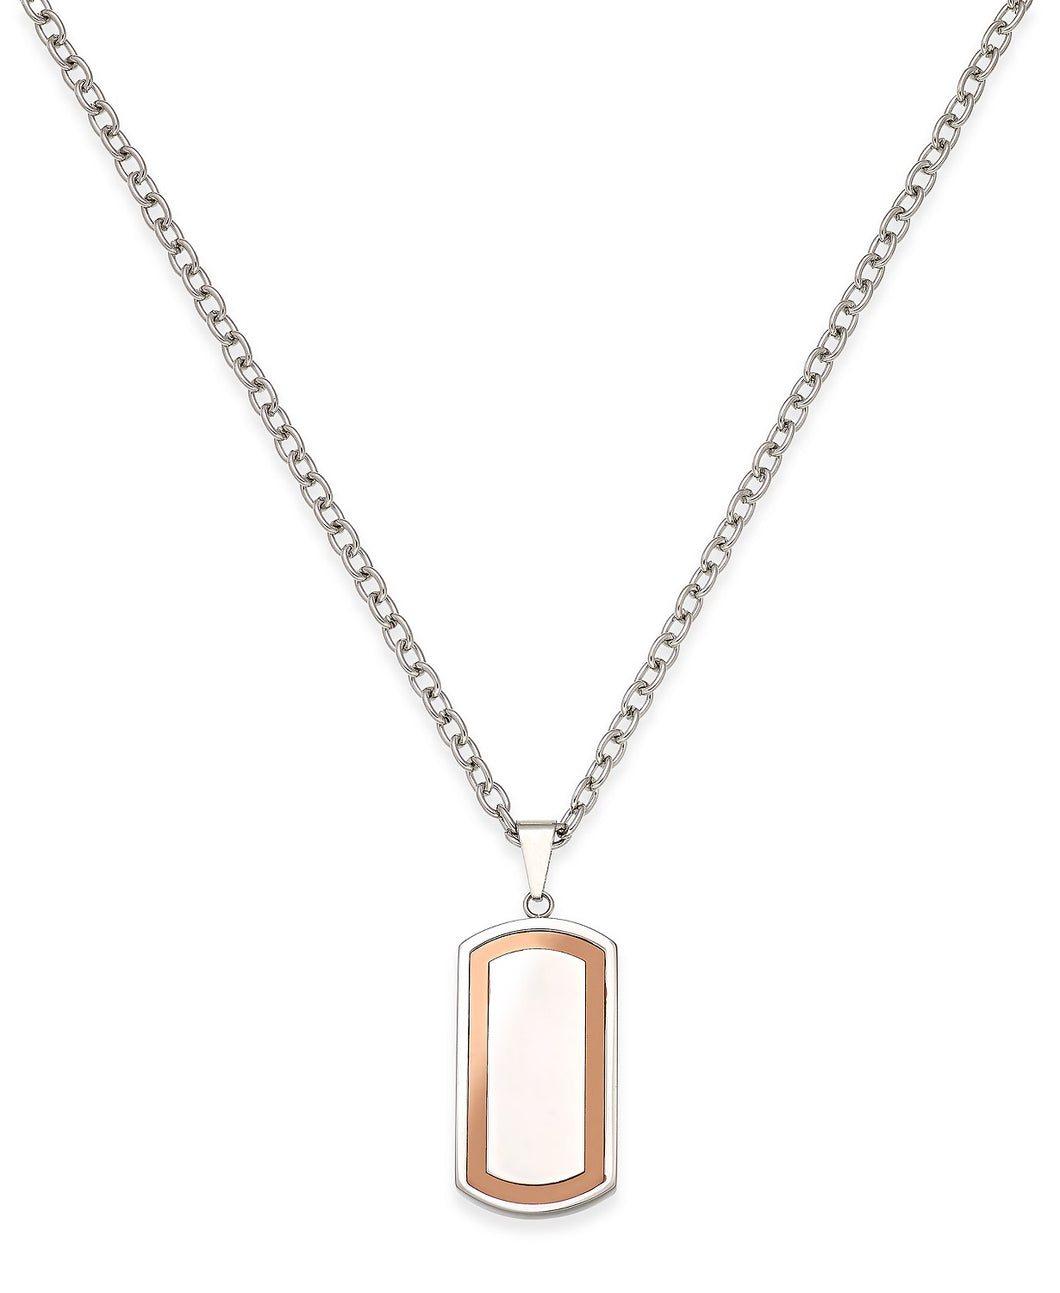 Men's Two-Tone Dog Tag Pendant Necklace